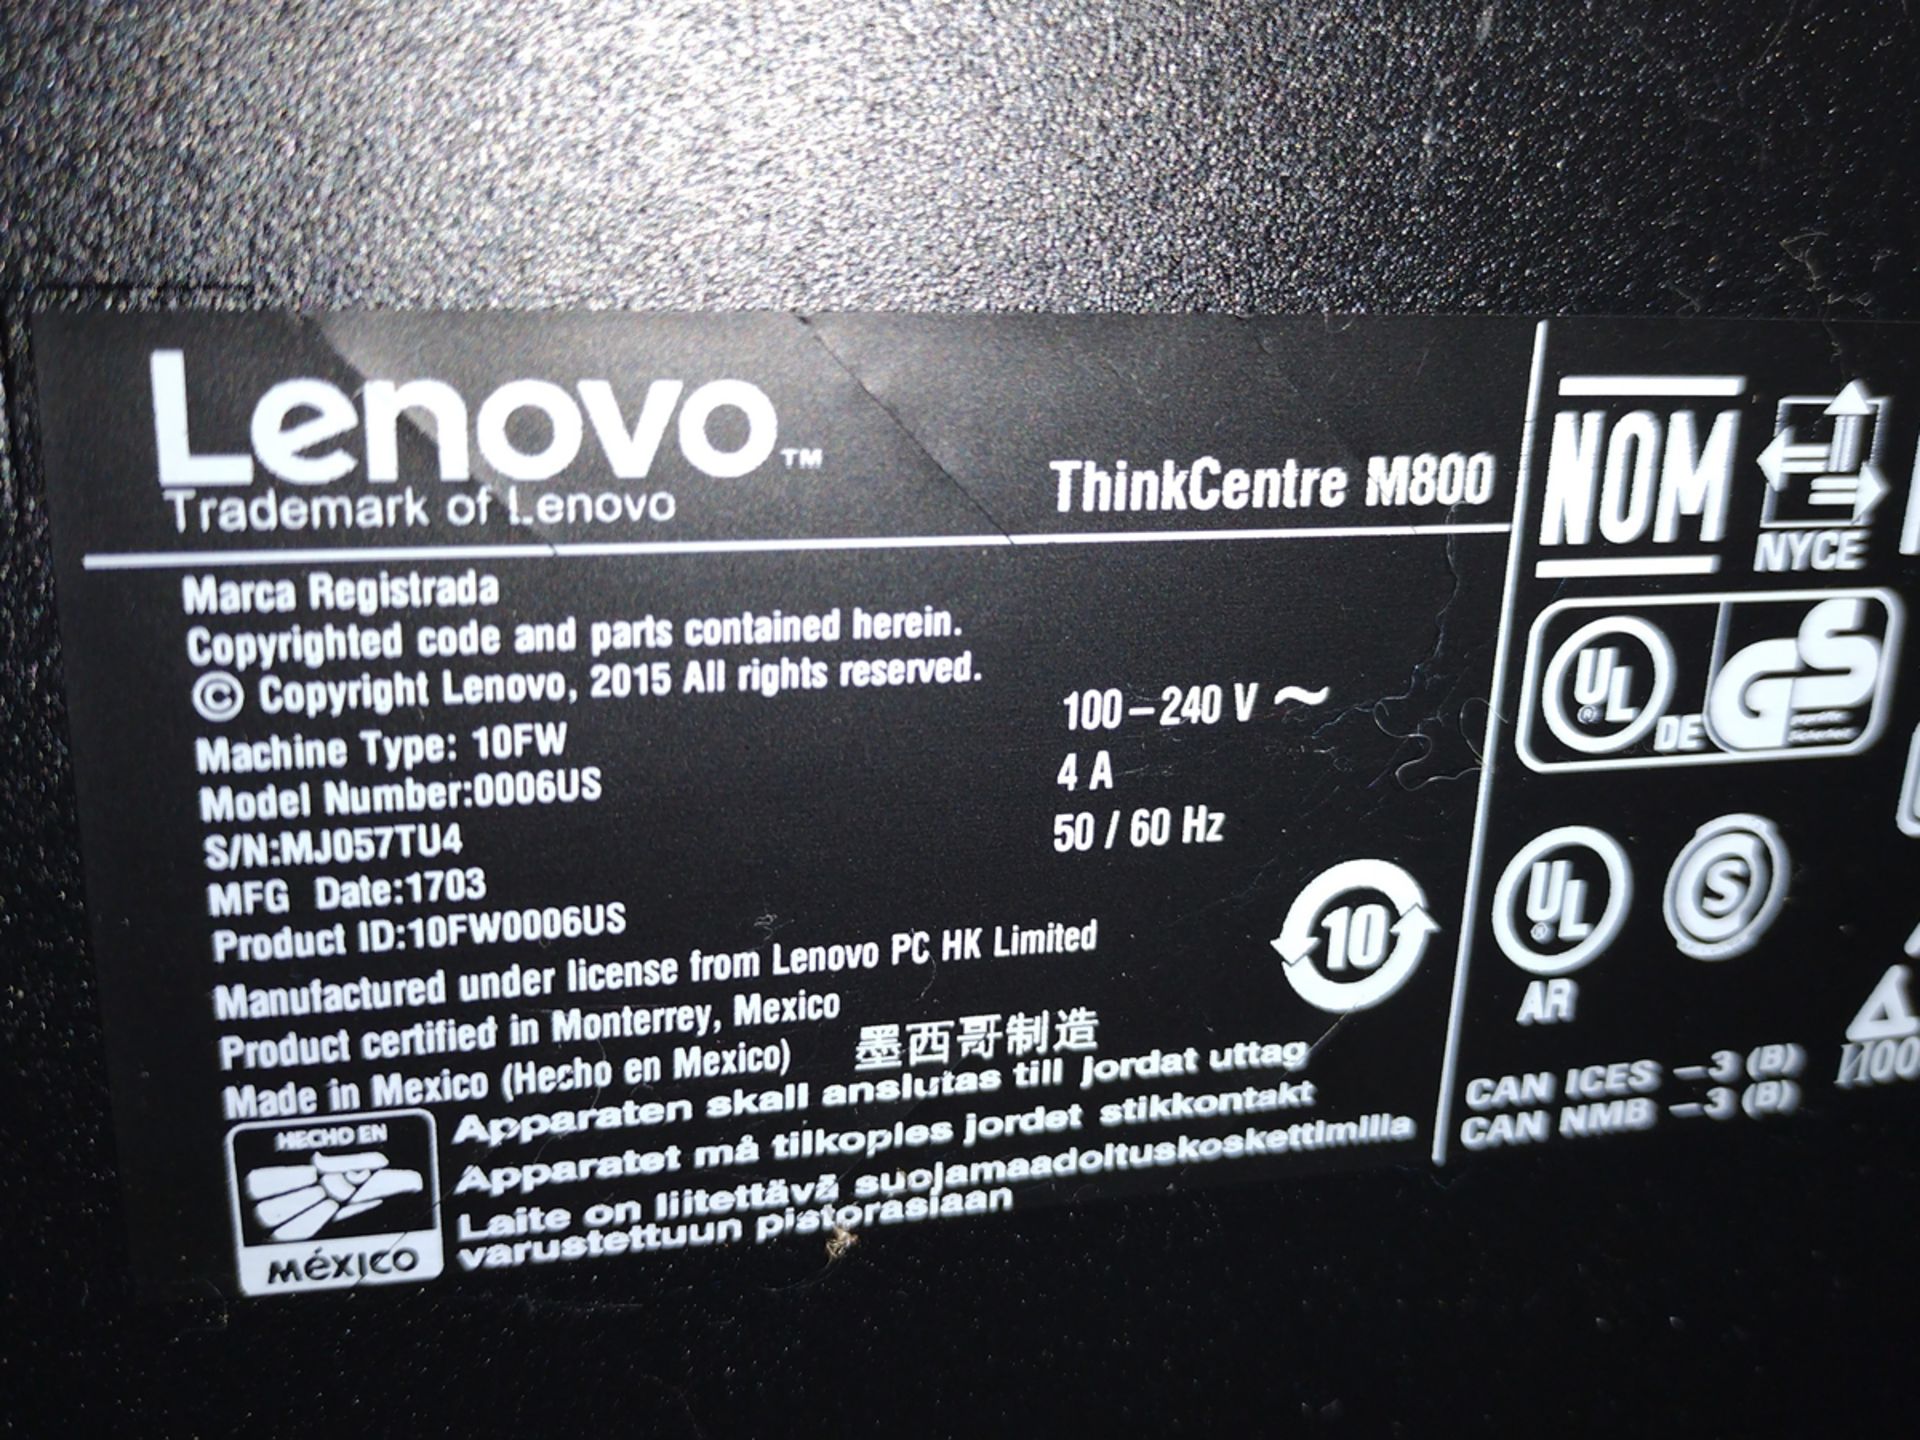 Lenovo M800 ThinkCentre i7 PC w/ Monitor and Keyboard - Image 2 of 2